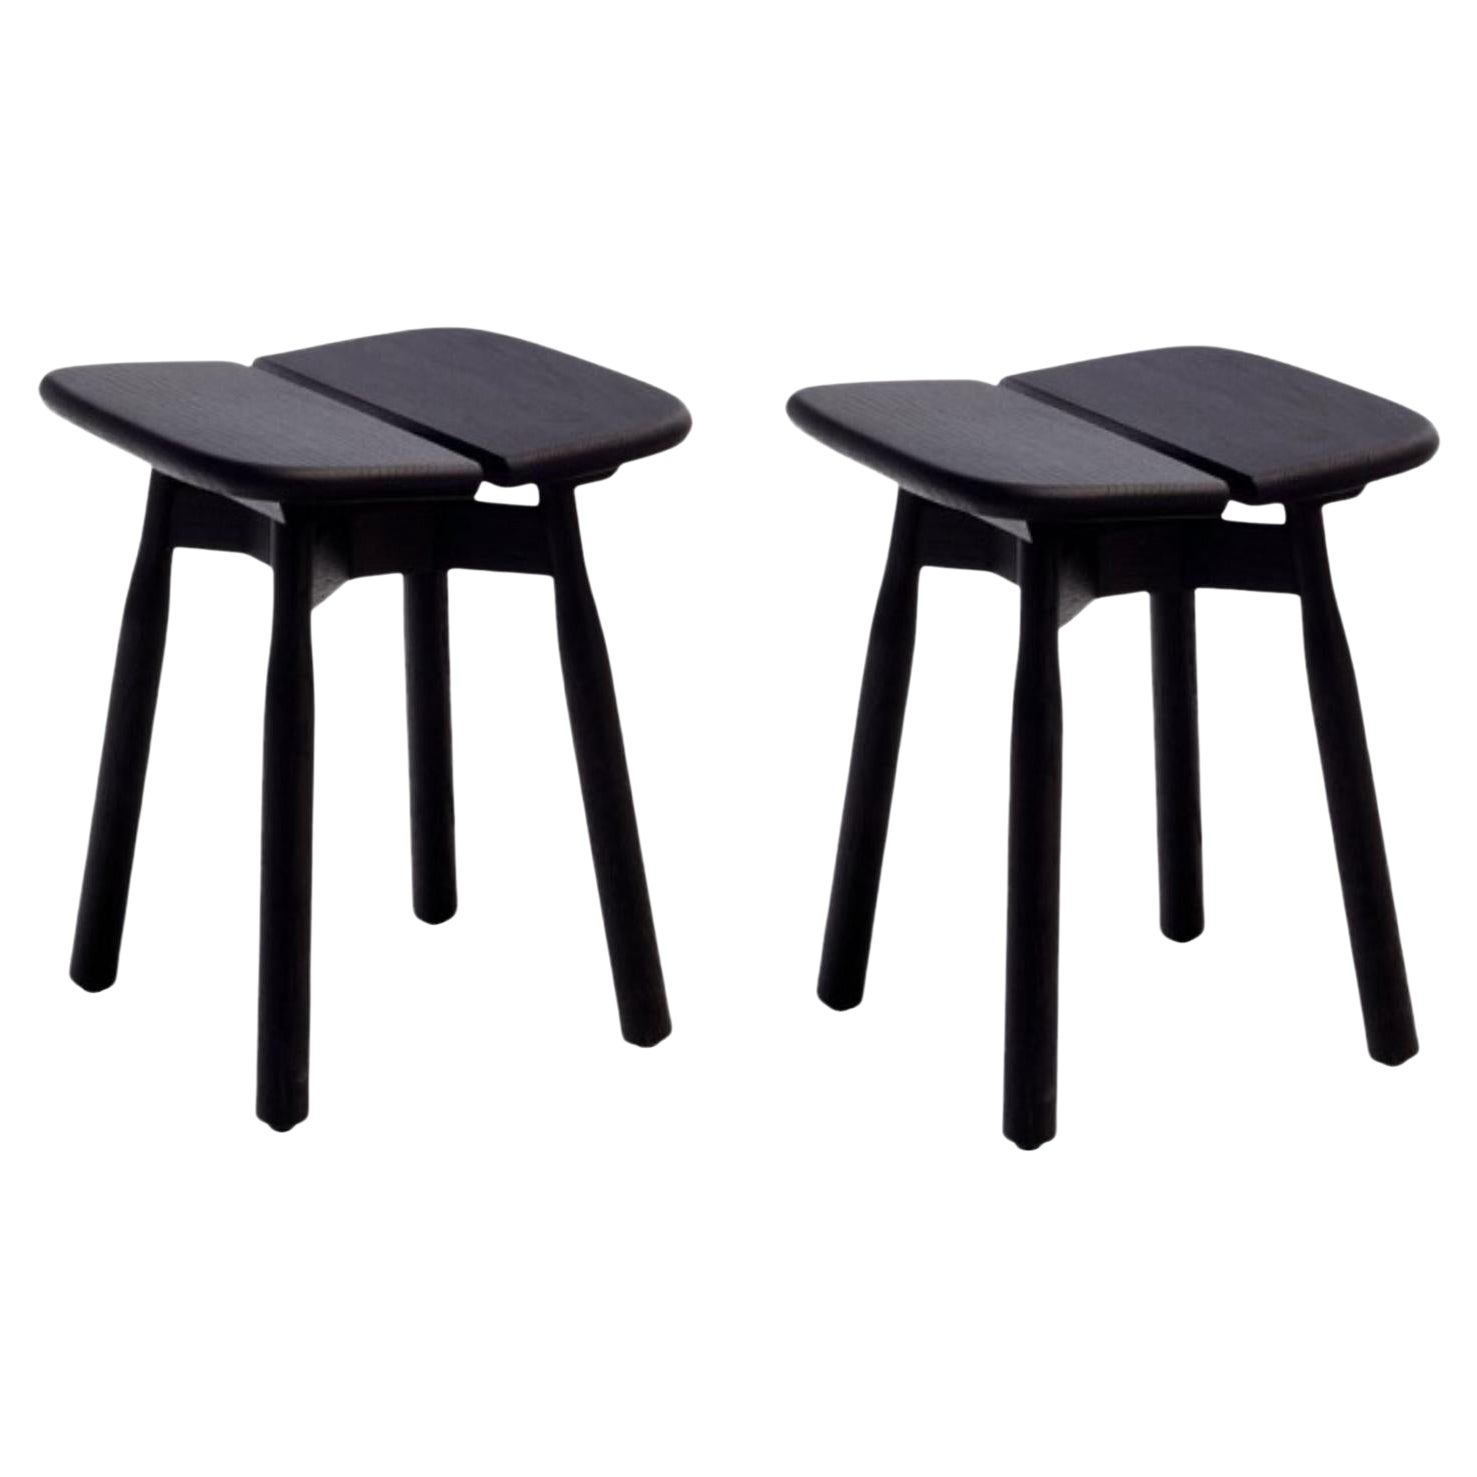 Set of 2 Black Stained Oak DOM Stools by Marcos Zanuso Jr